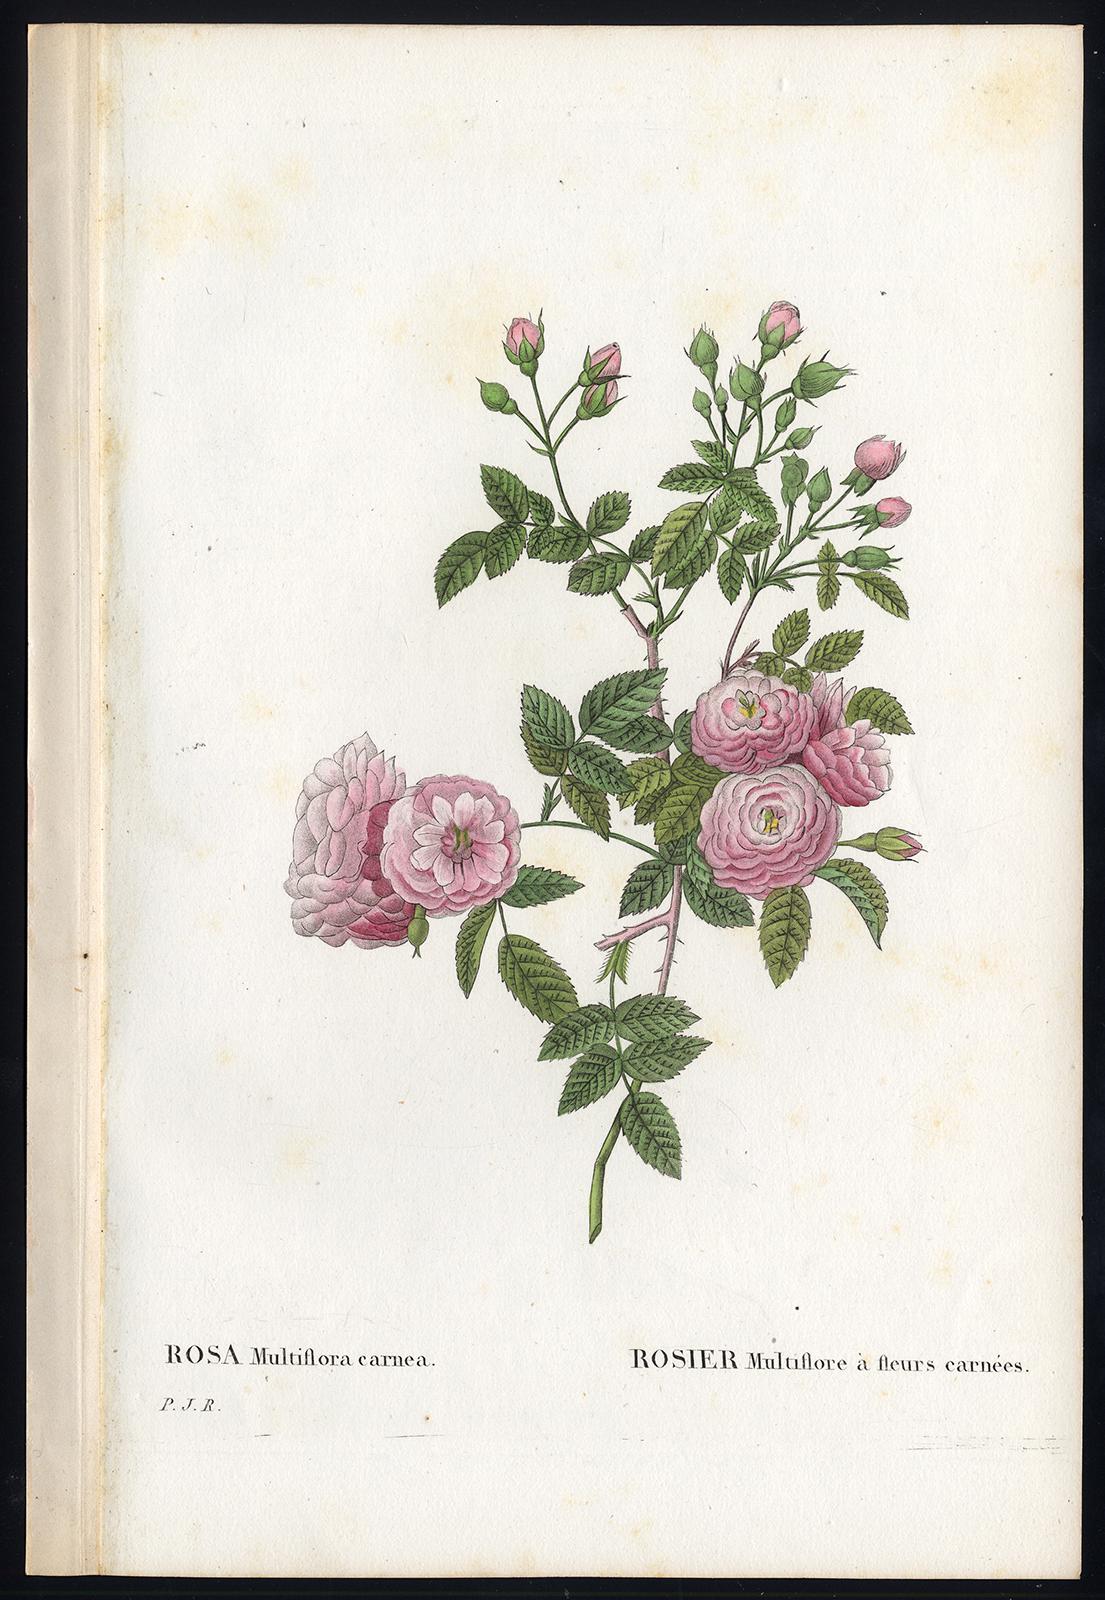 Pierre-Joseph Redouté Print - Rambling Rose by Redoute - Les Roses - Handcoloured engraving - 19th century